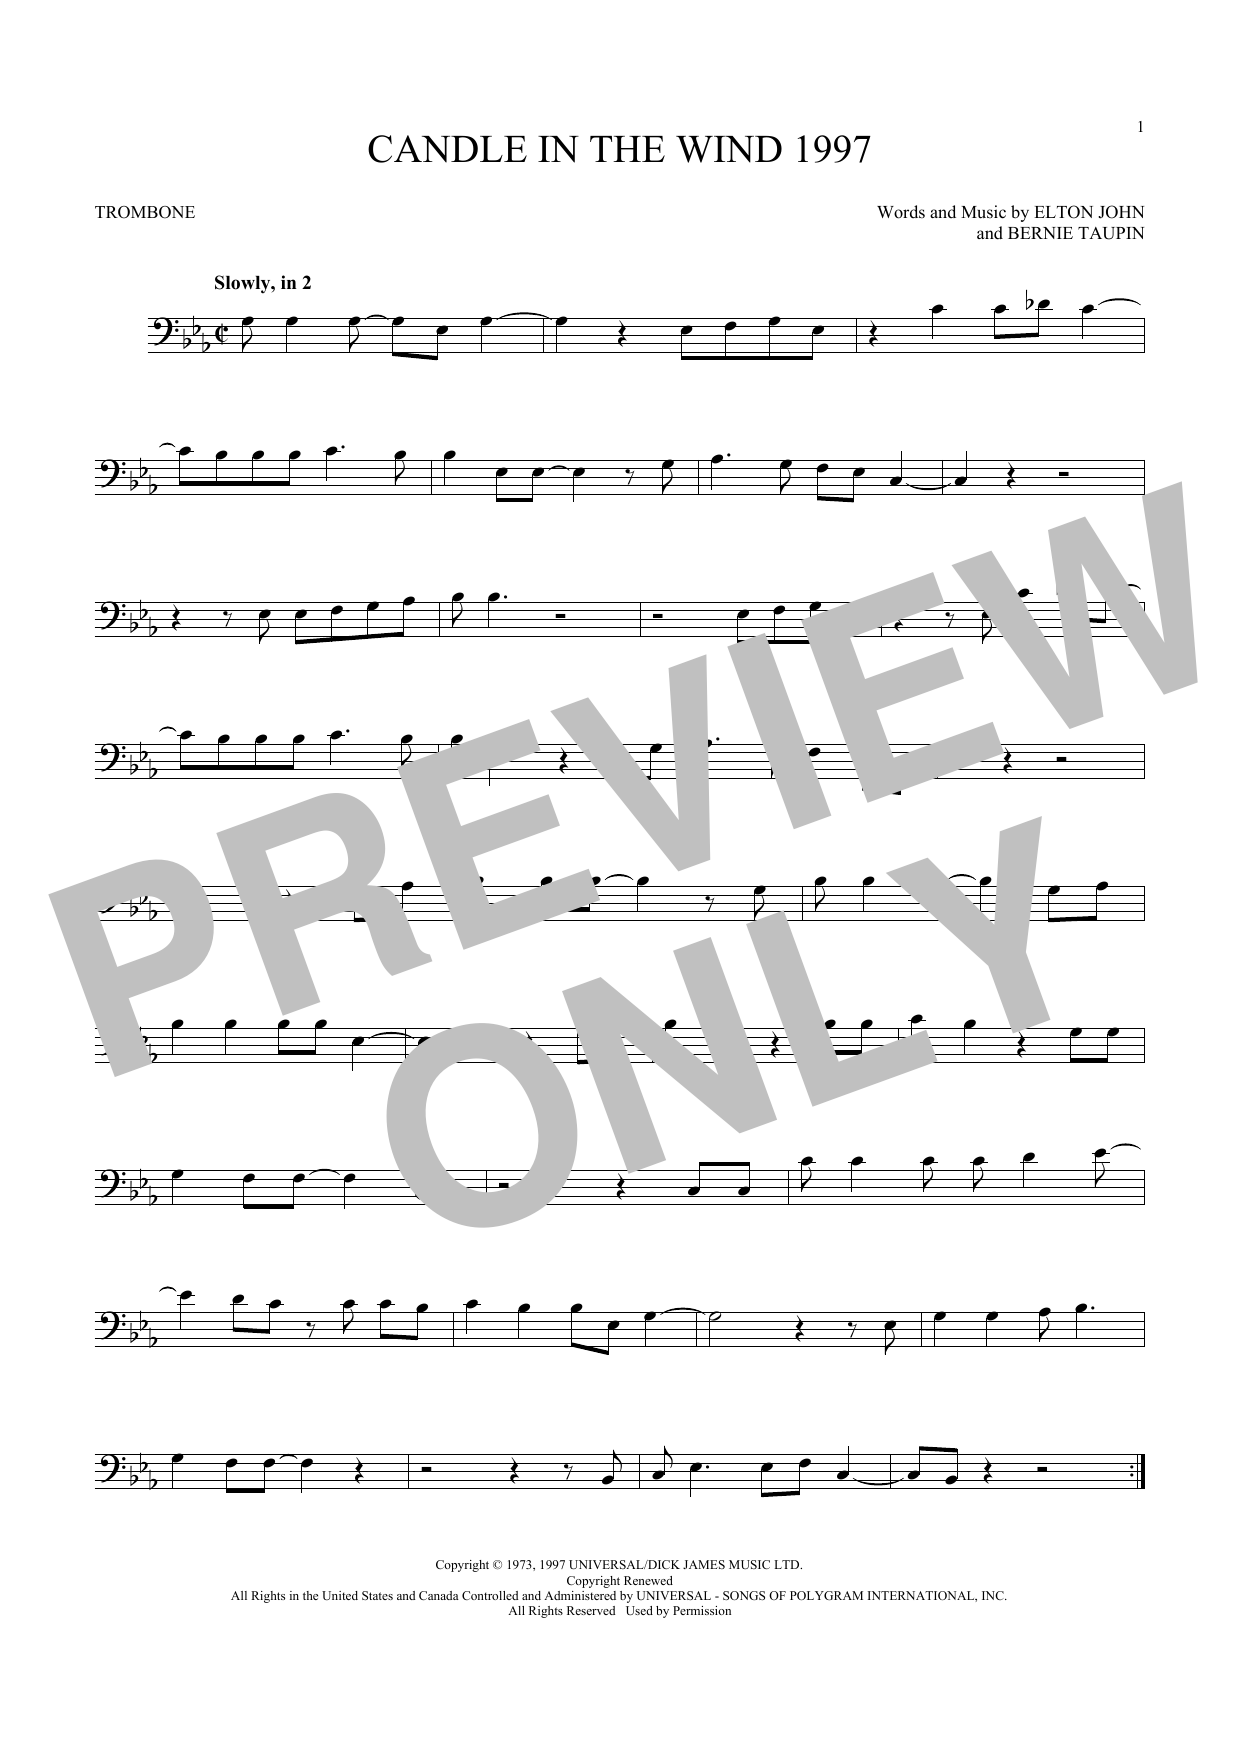 Download Elton John Candle In The Wind 1997 Sheet Music